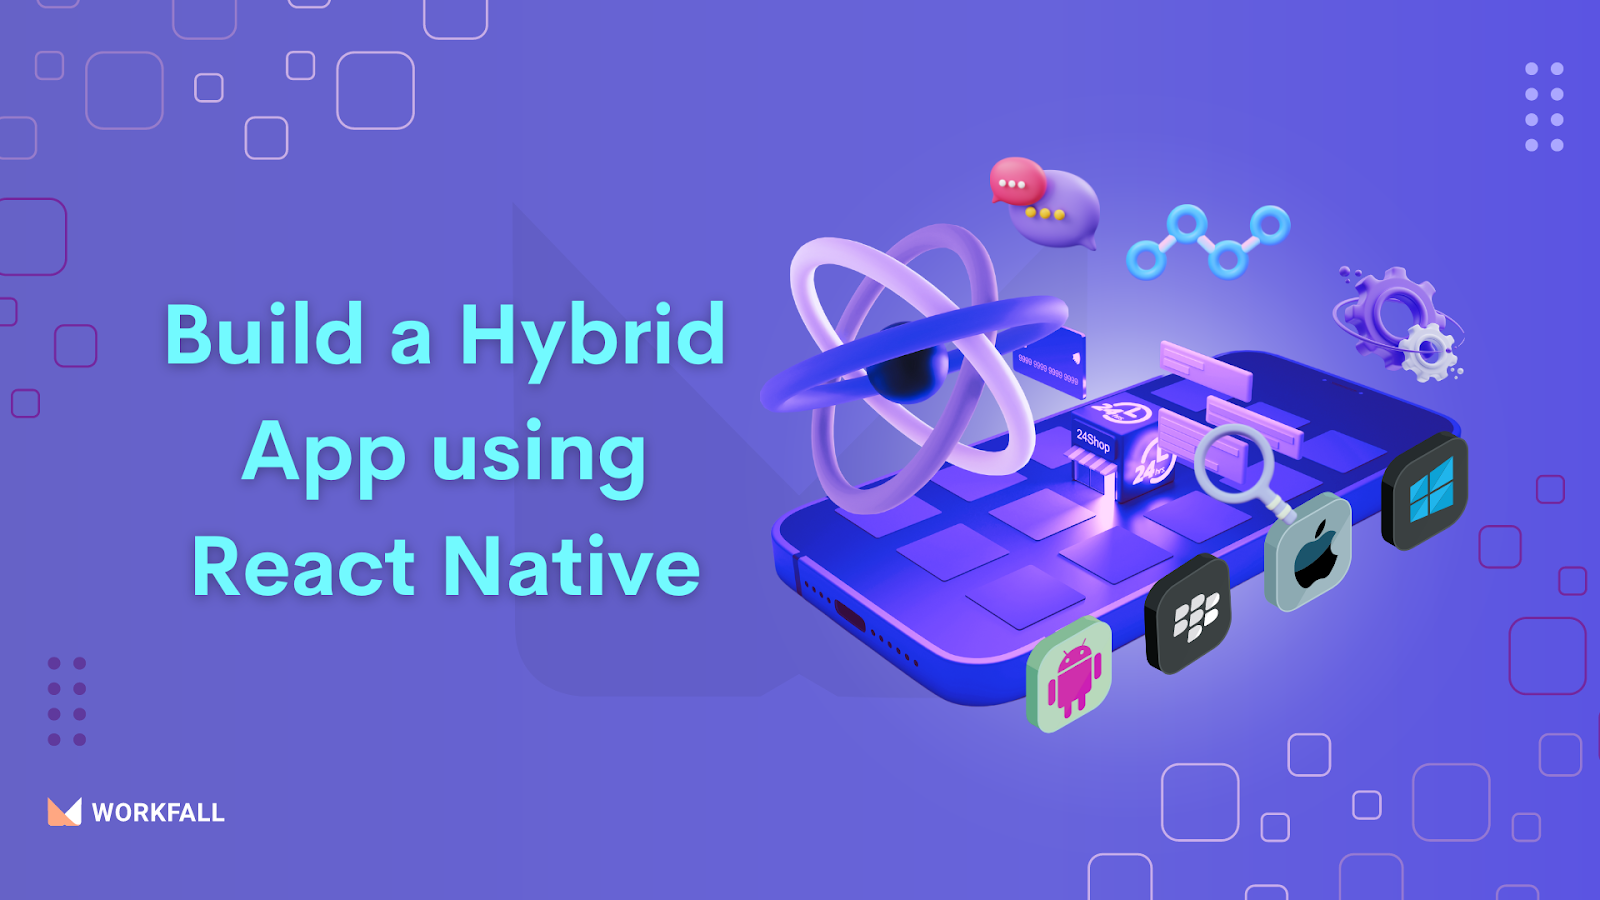 How to Build a Hybrid App using React Native? - The Workfall Blog